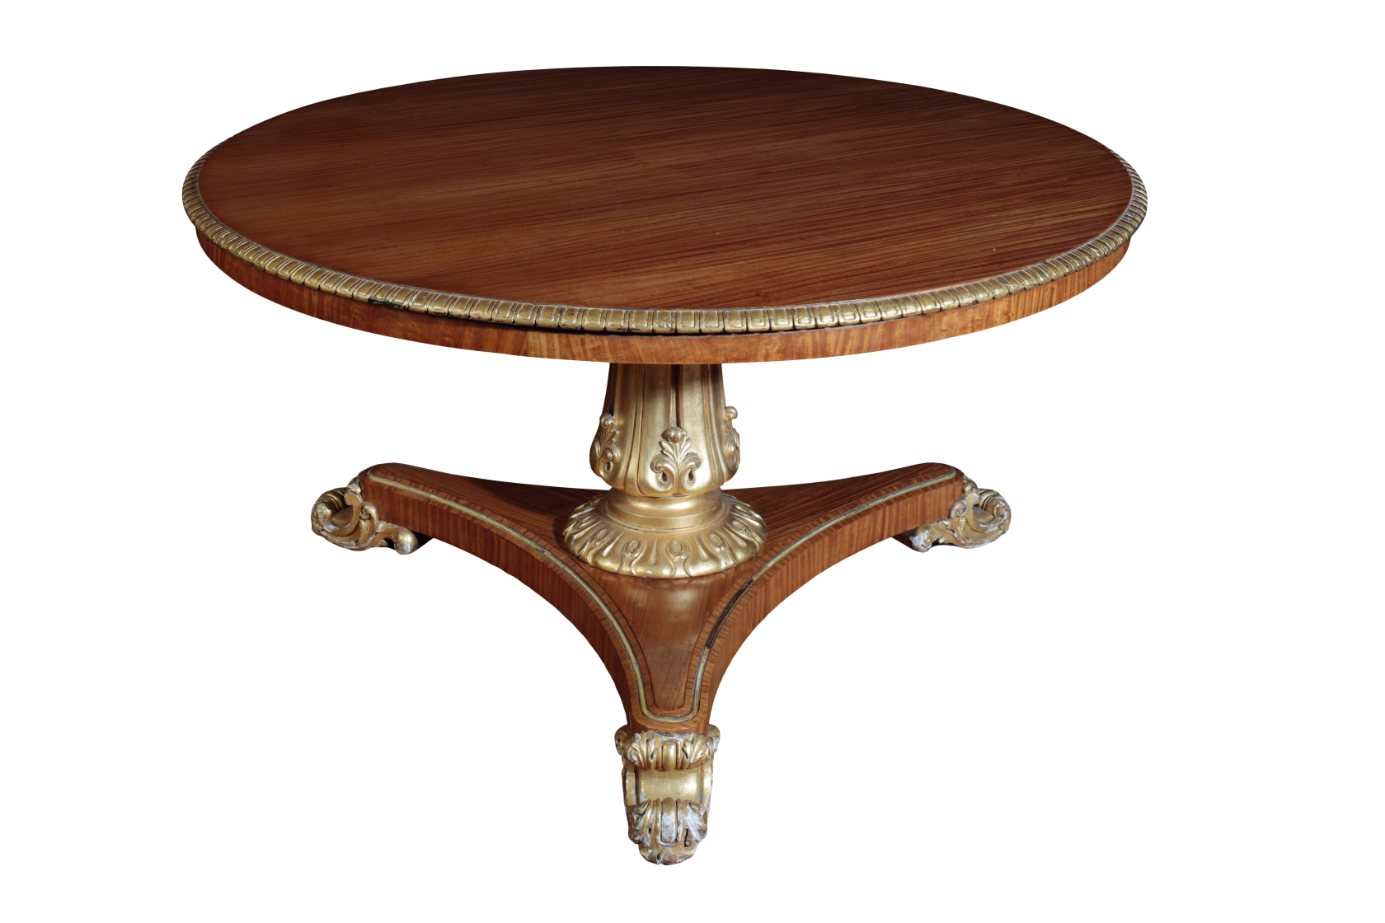 A GEORGE IV PARCEL GILT SATINWOOD CENTRE TABLE, BY WILLIAM RIDDLE, - Image 2 of 2